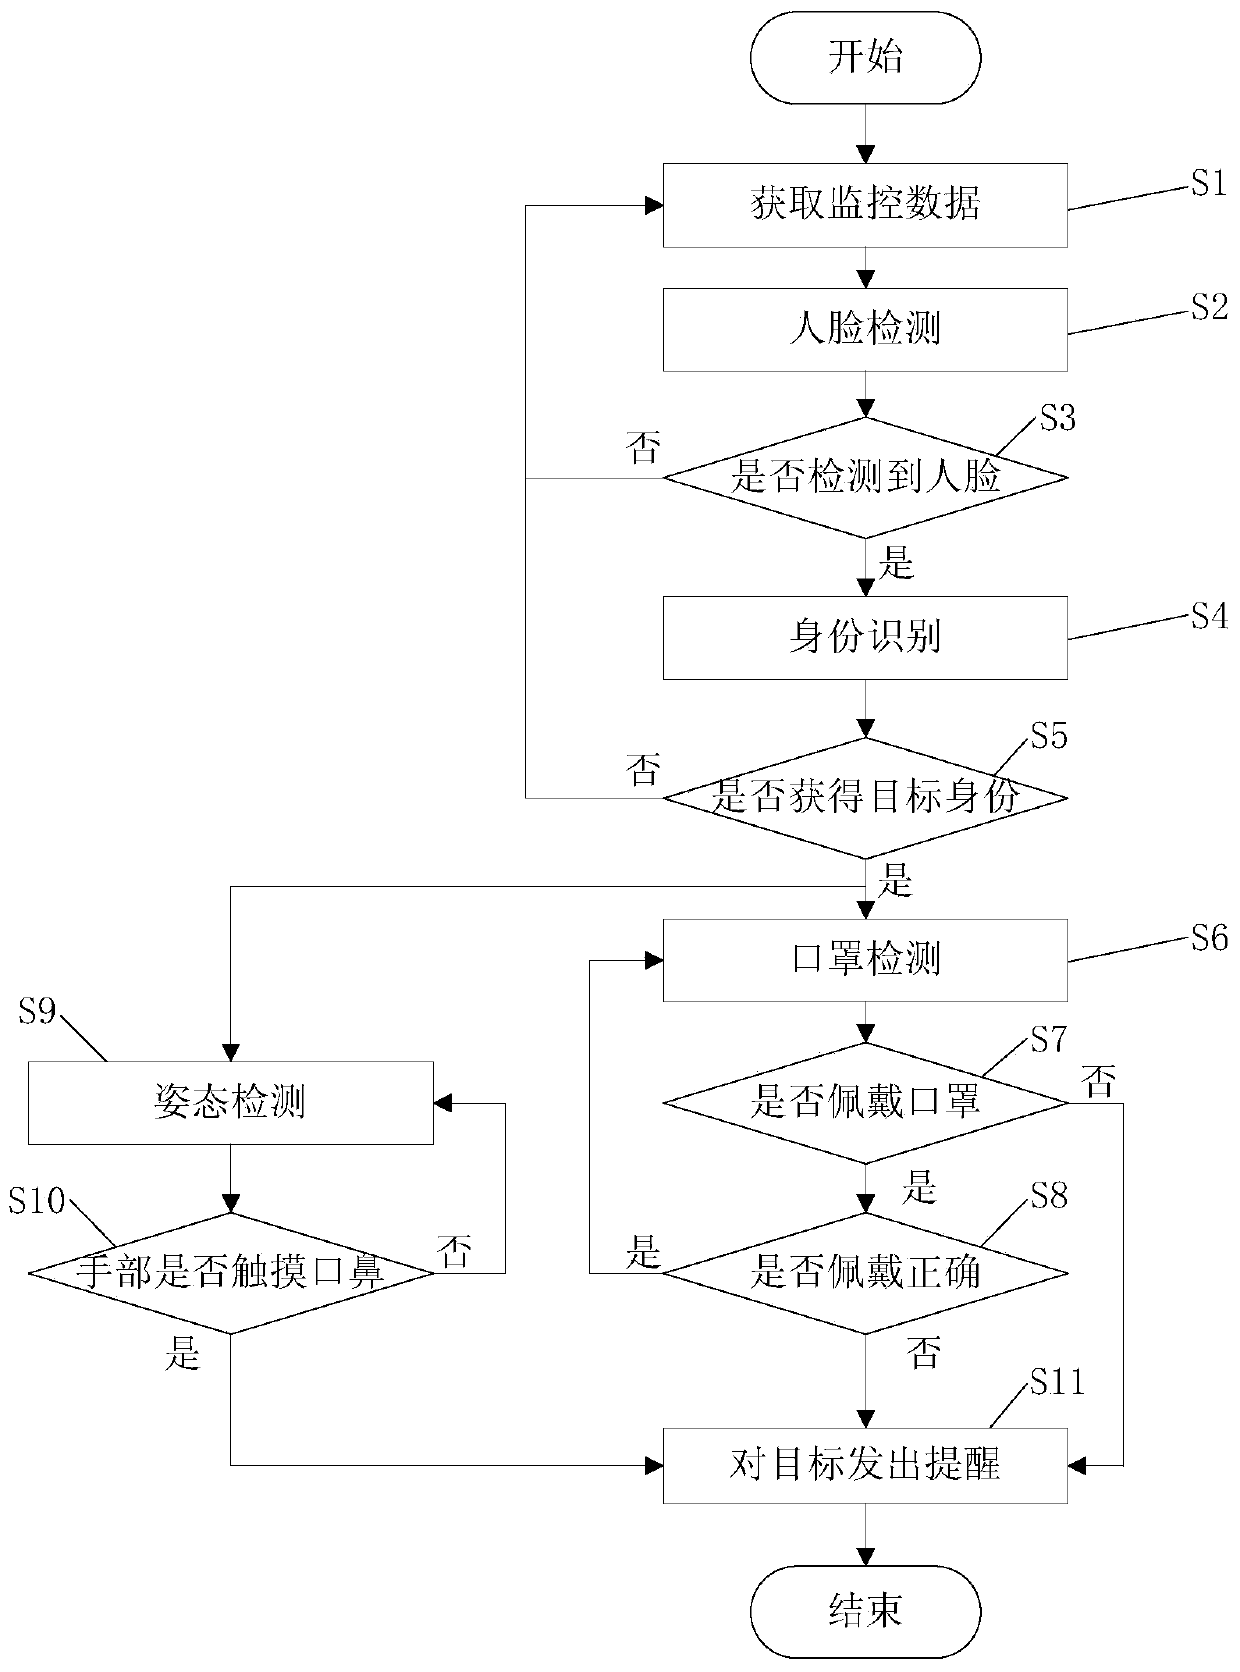 Mask wearing condition monitoring method based on face and posture recognition